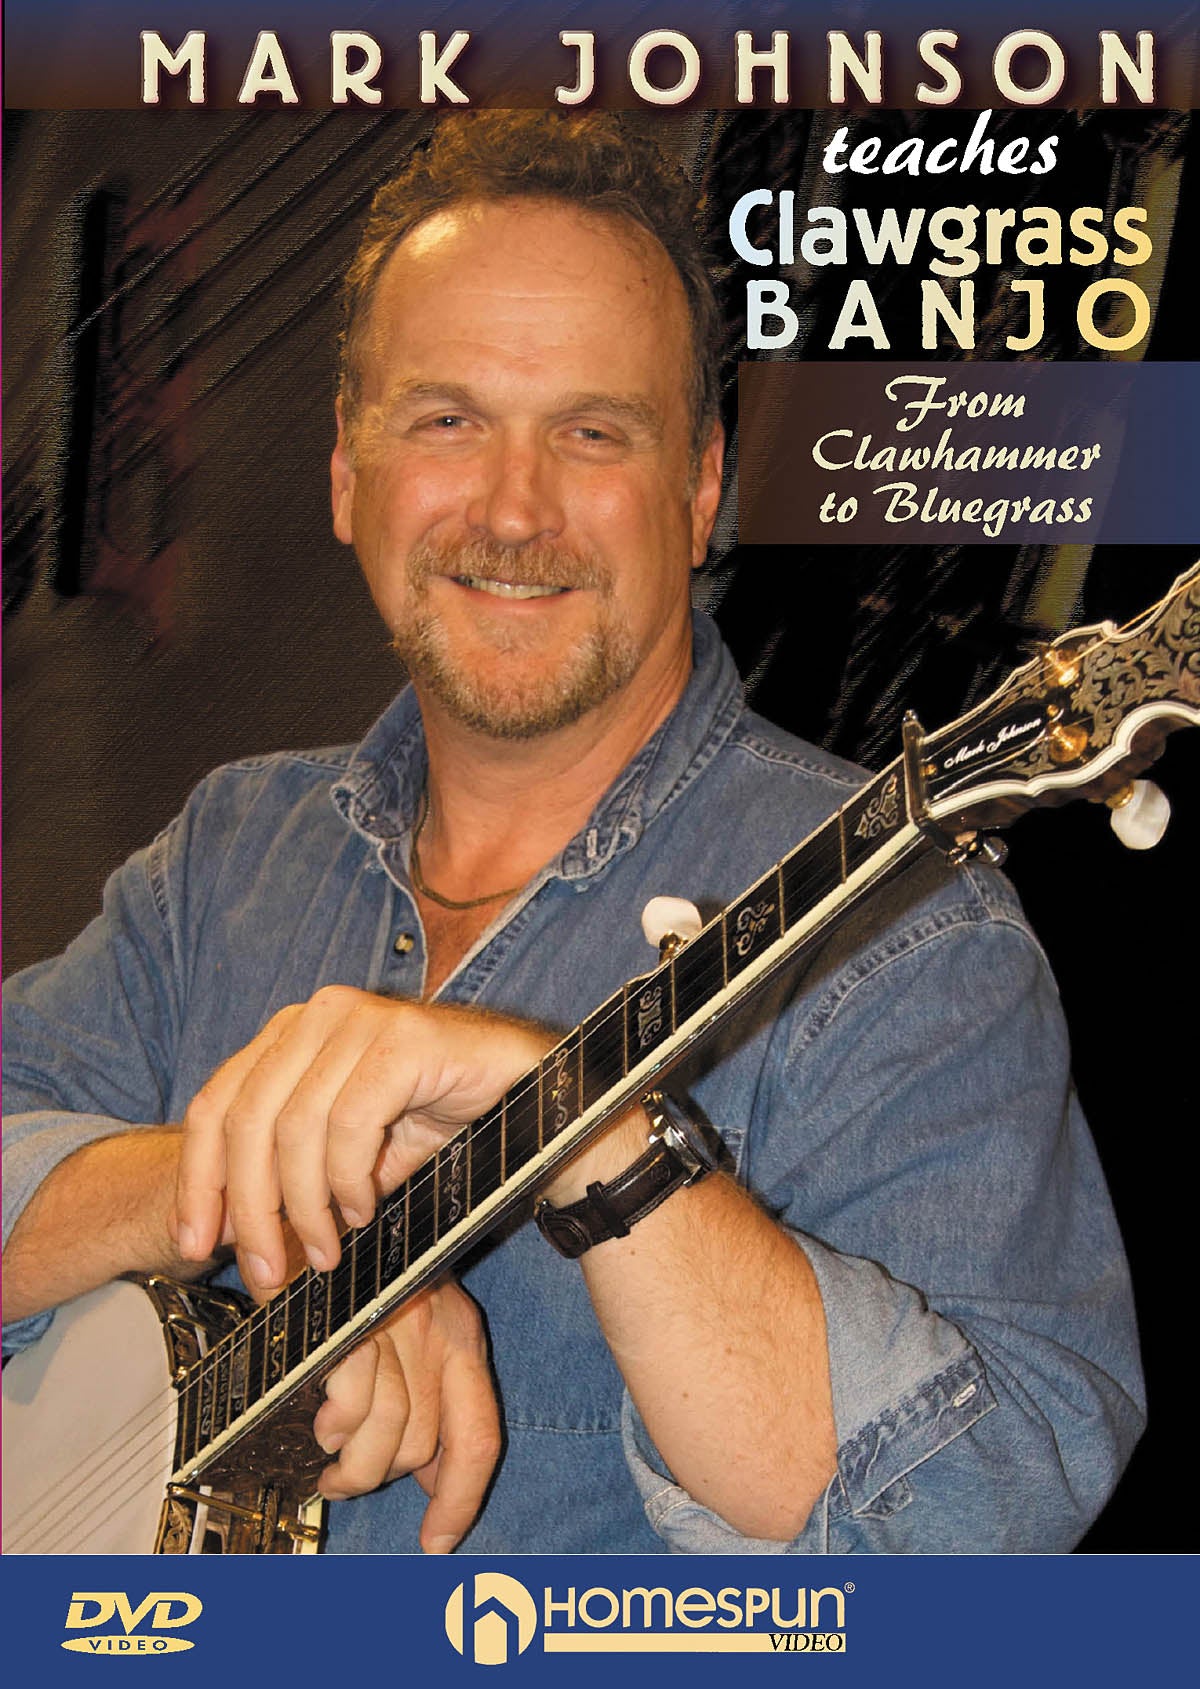 Image 1 of DVD - Mark Johnson Teaches Clawgrass Banjo - From Clawhammer to Bluegrass - SKU# 300-DVD365 : Product Type Media : Elderly Instruments